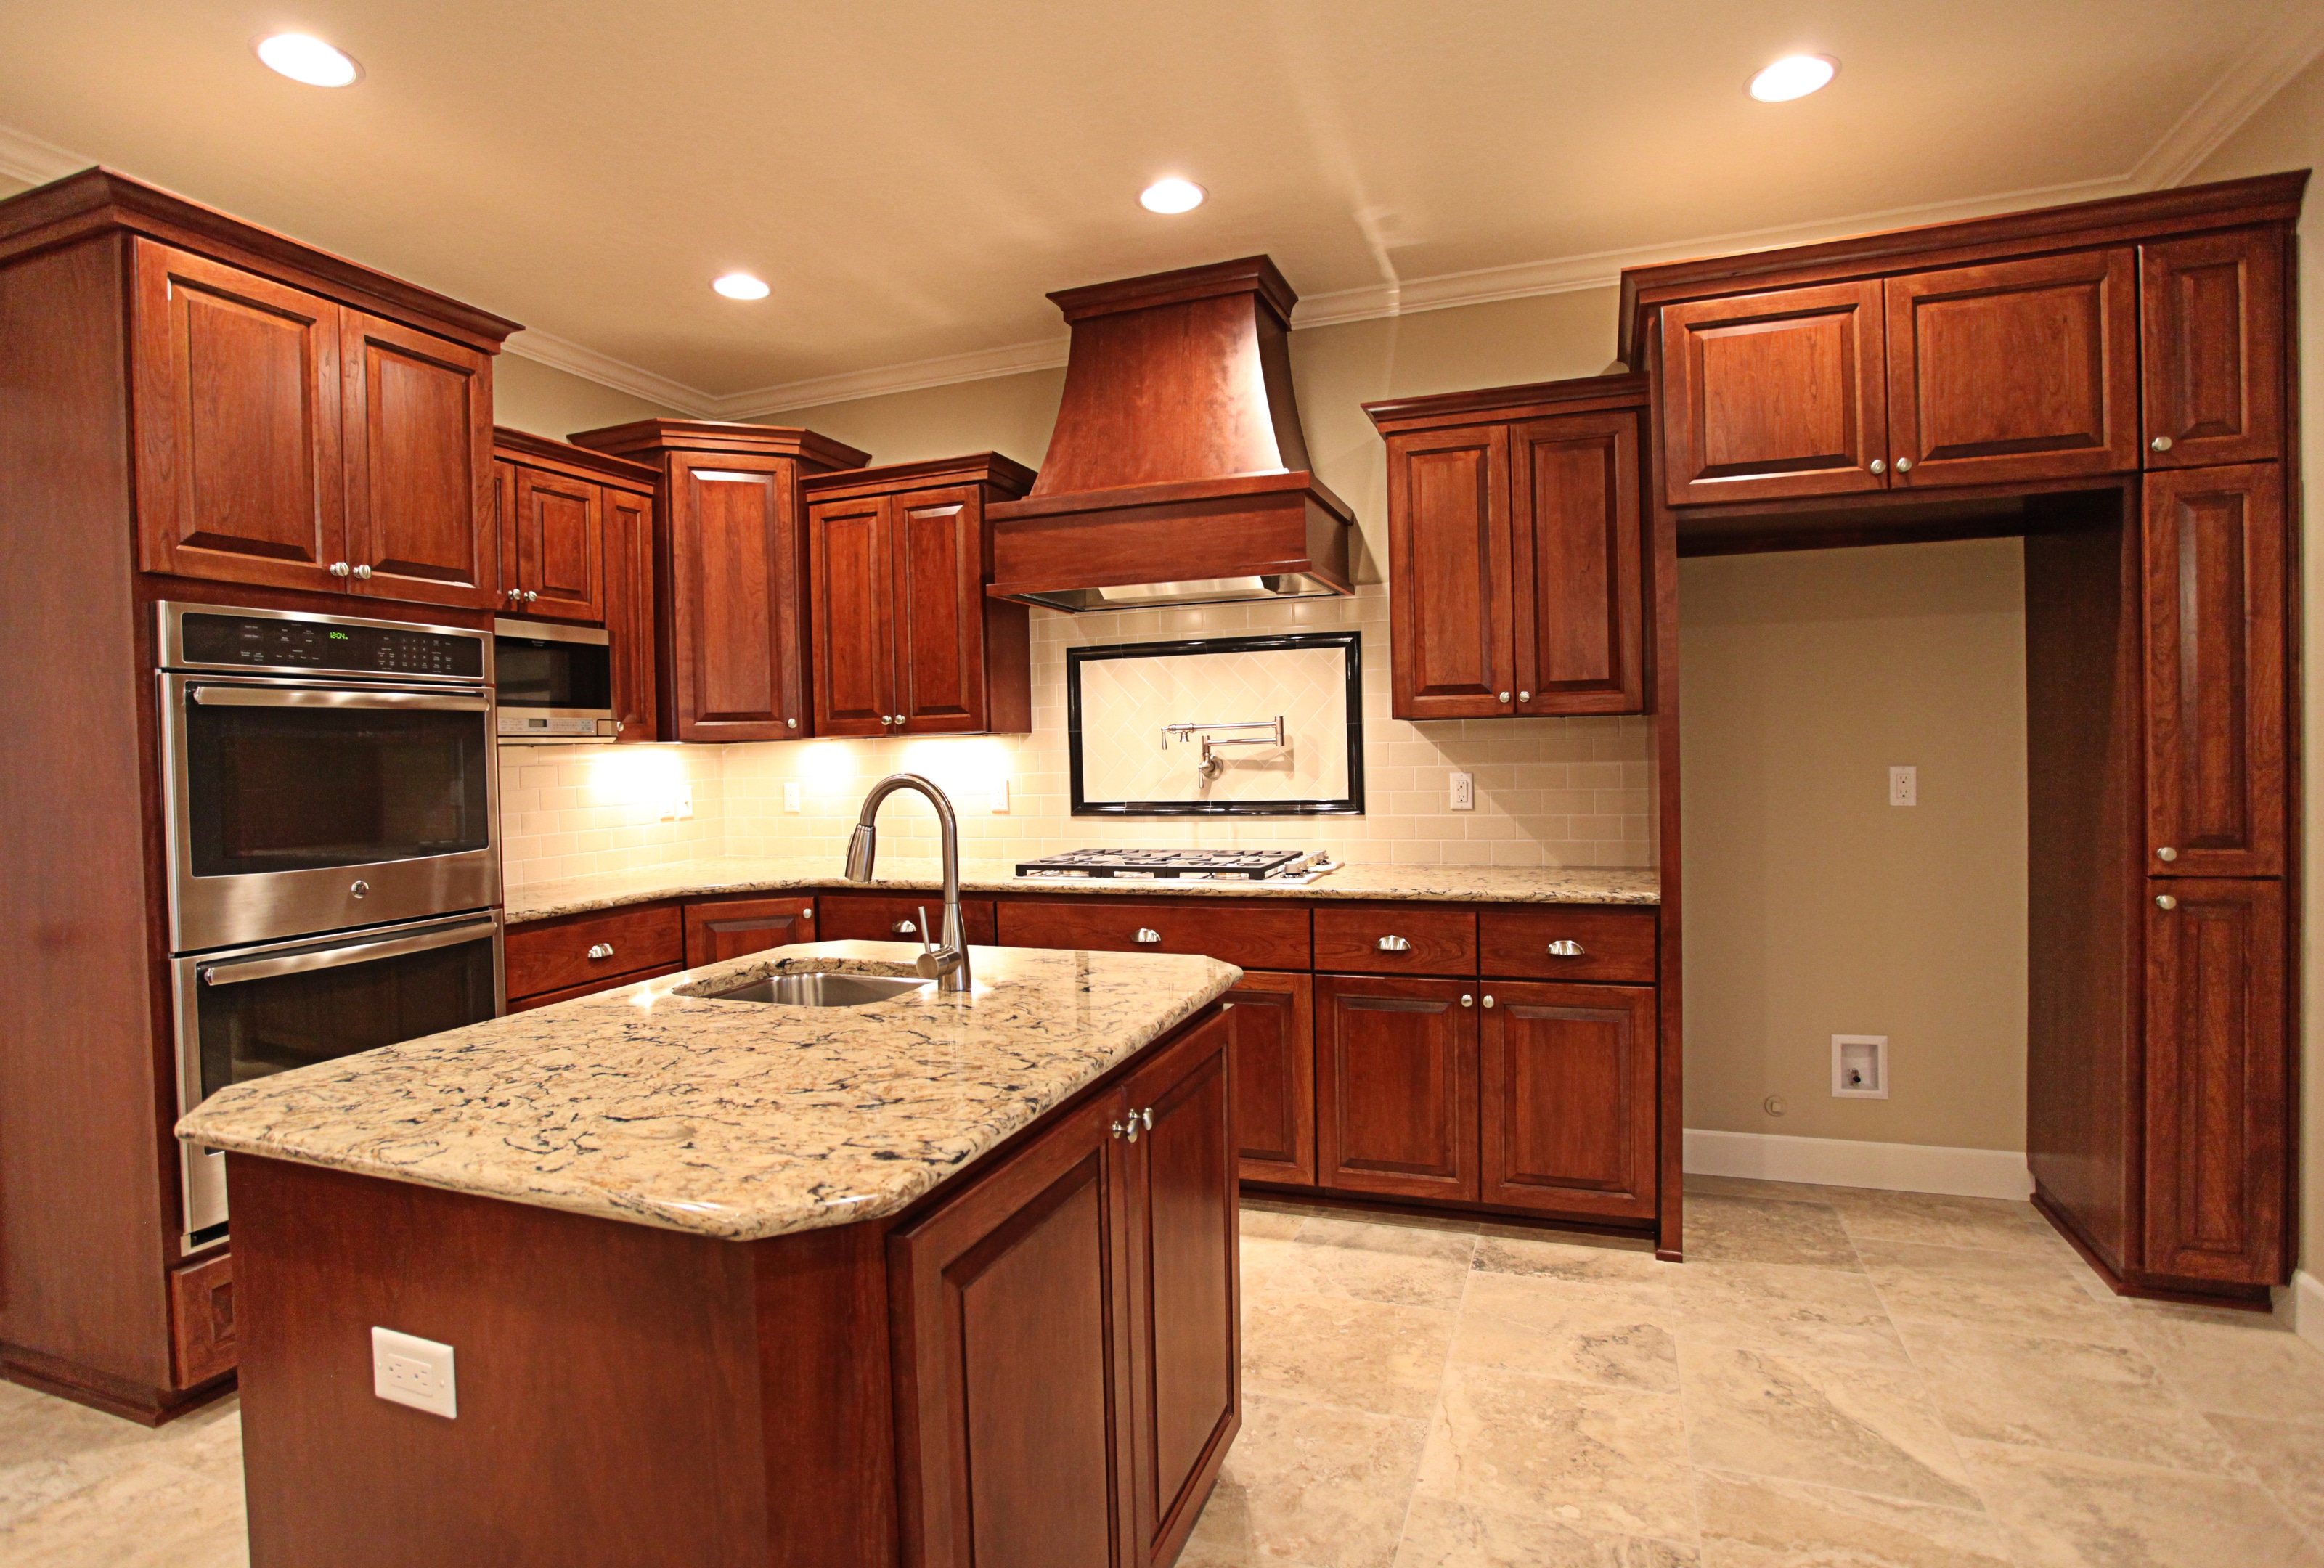 Traditional-kitchen-counter-depth-upper-wall-cabinets-stained-kitchen-cabinets